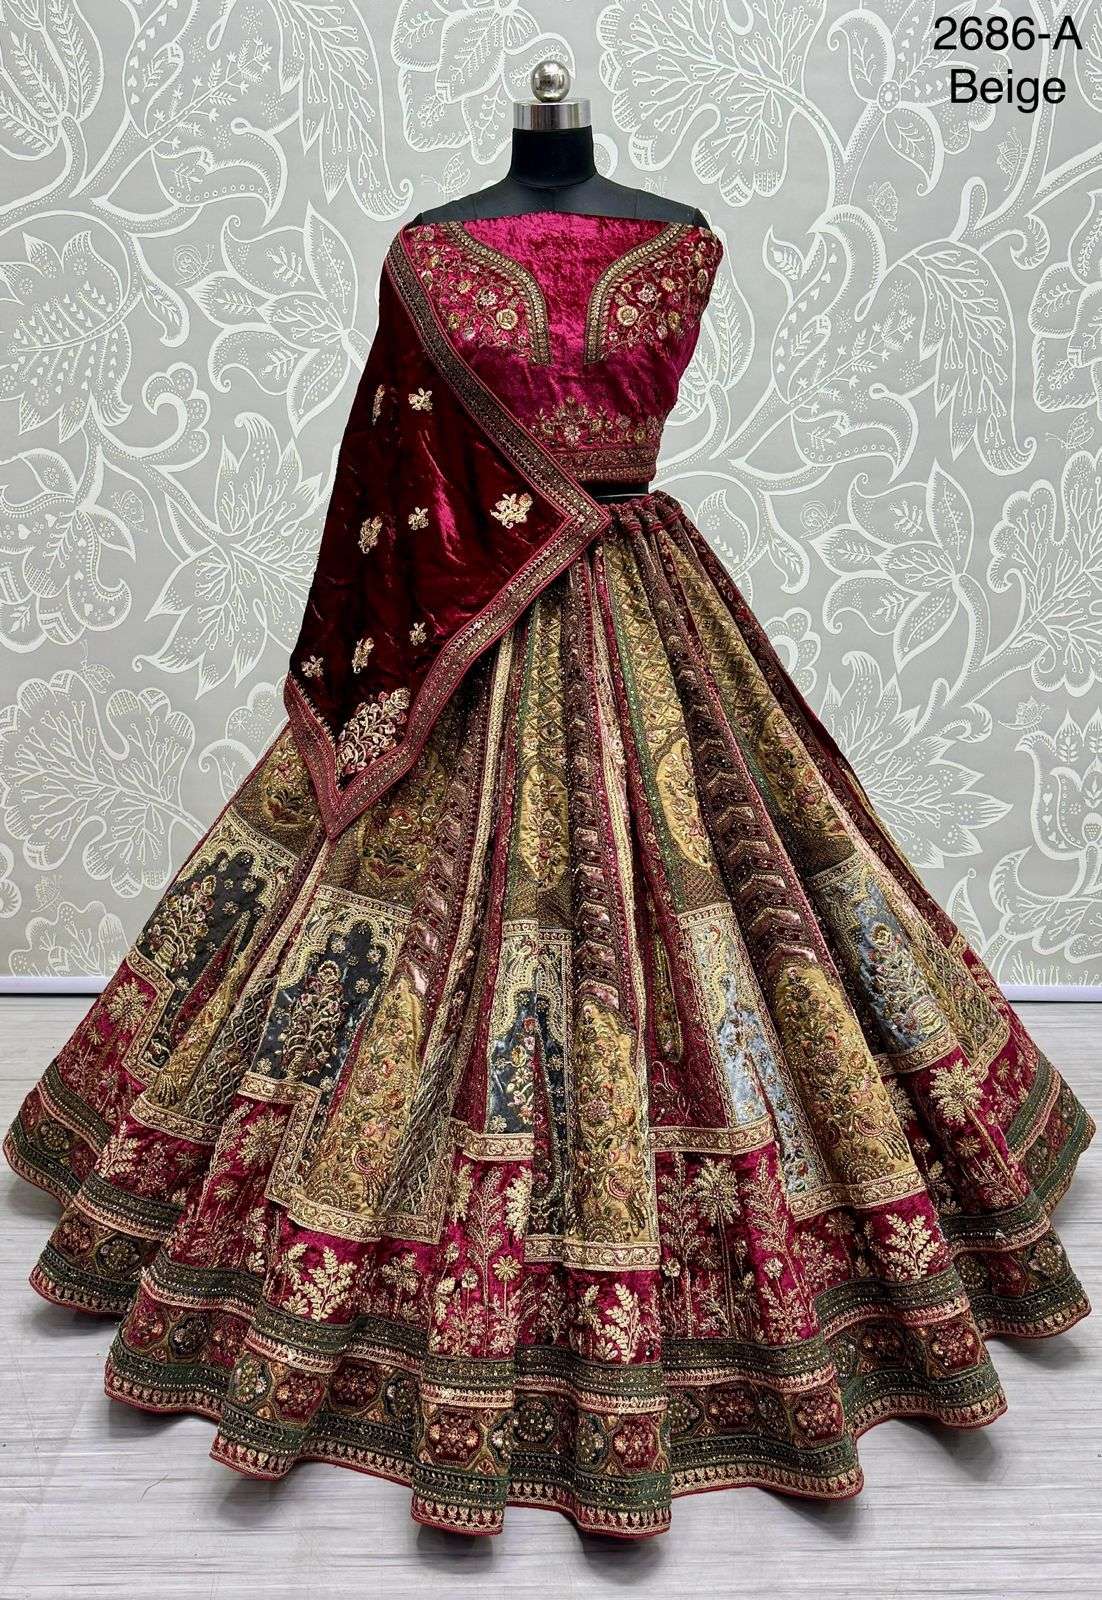 ROYAL LOOK VELVET WITH HAND ZARI, EMBROIDERY WORK BRIDAL SPECIAL DESIGNER LEHENGA CHOLI COLLECTION AT BEST RATE